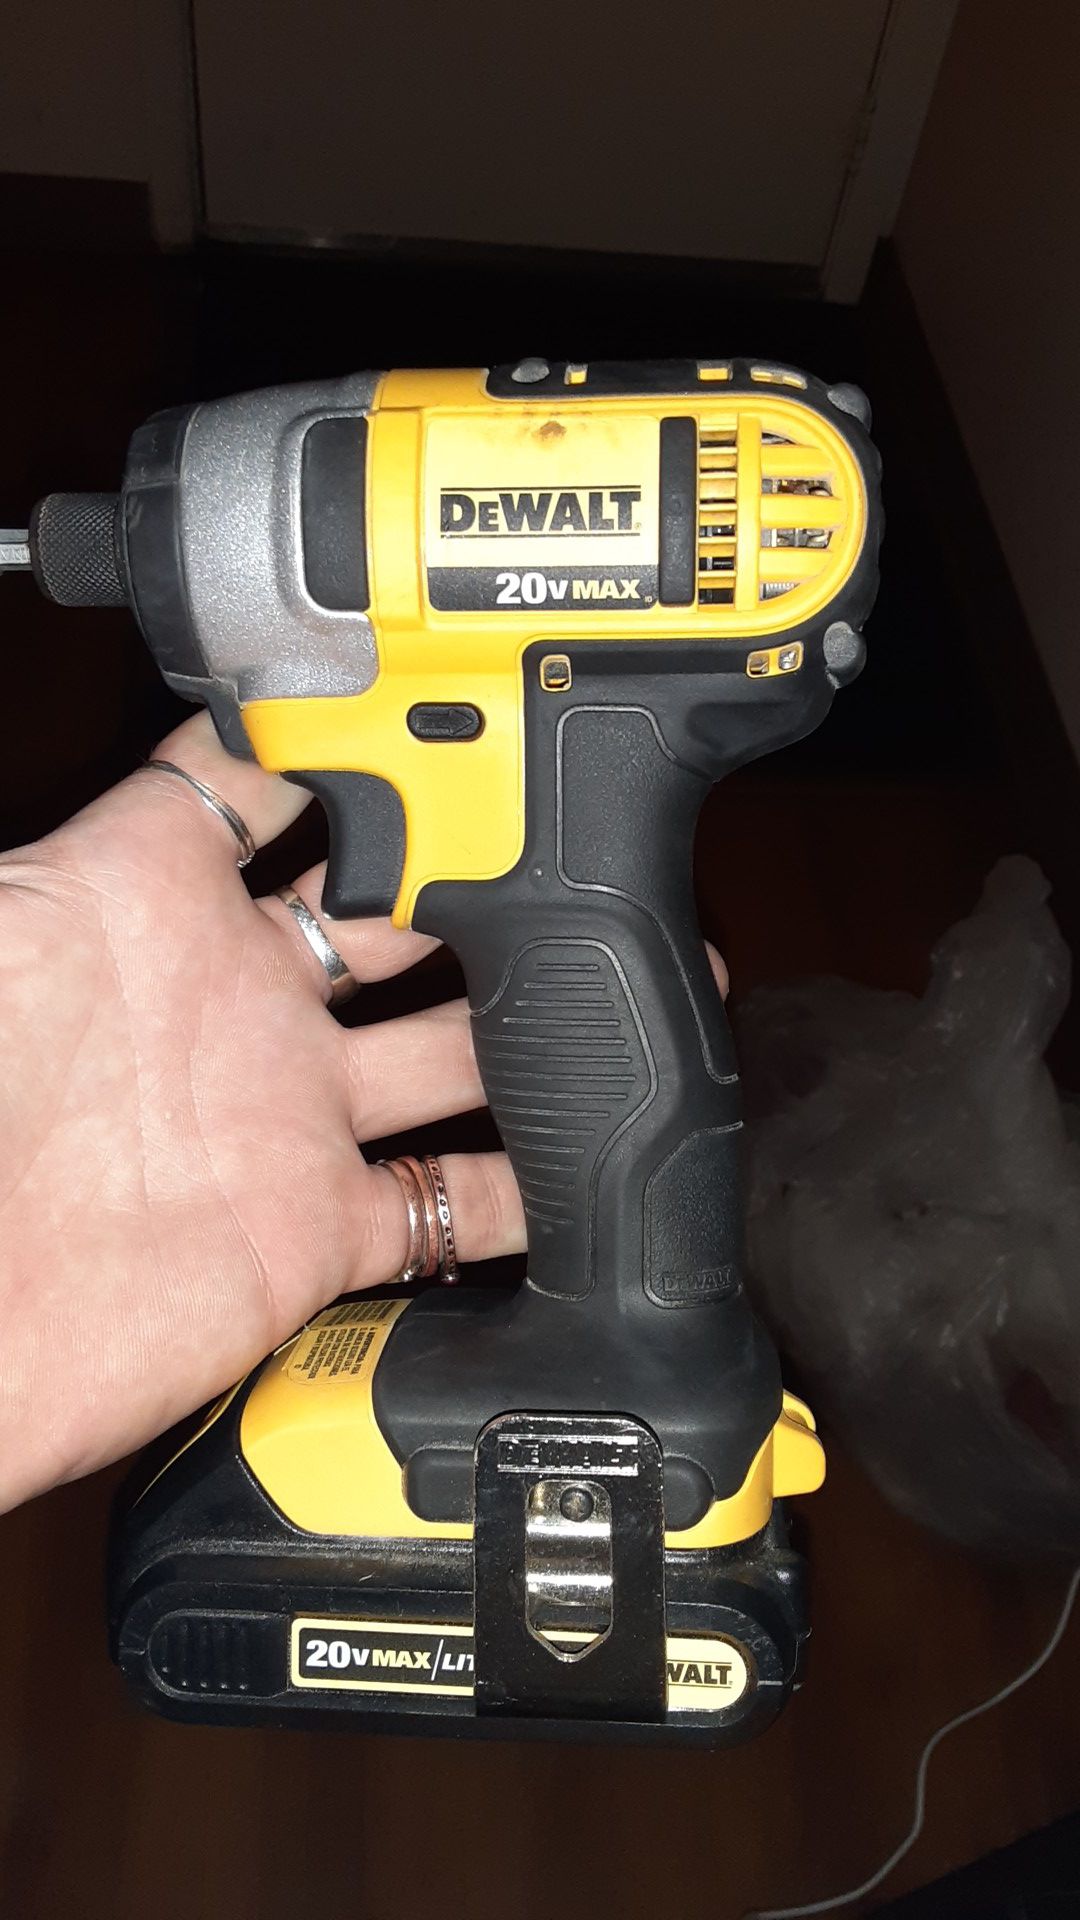 DeWALT 20v MAX lithium ion drill and battery